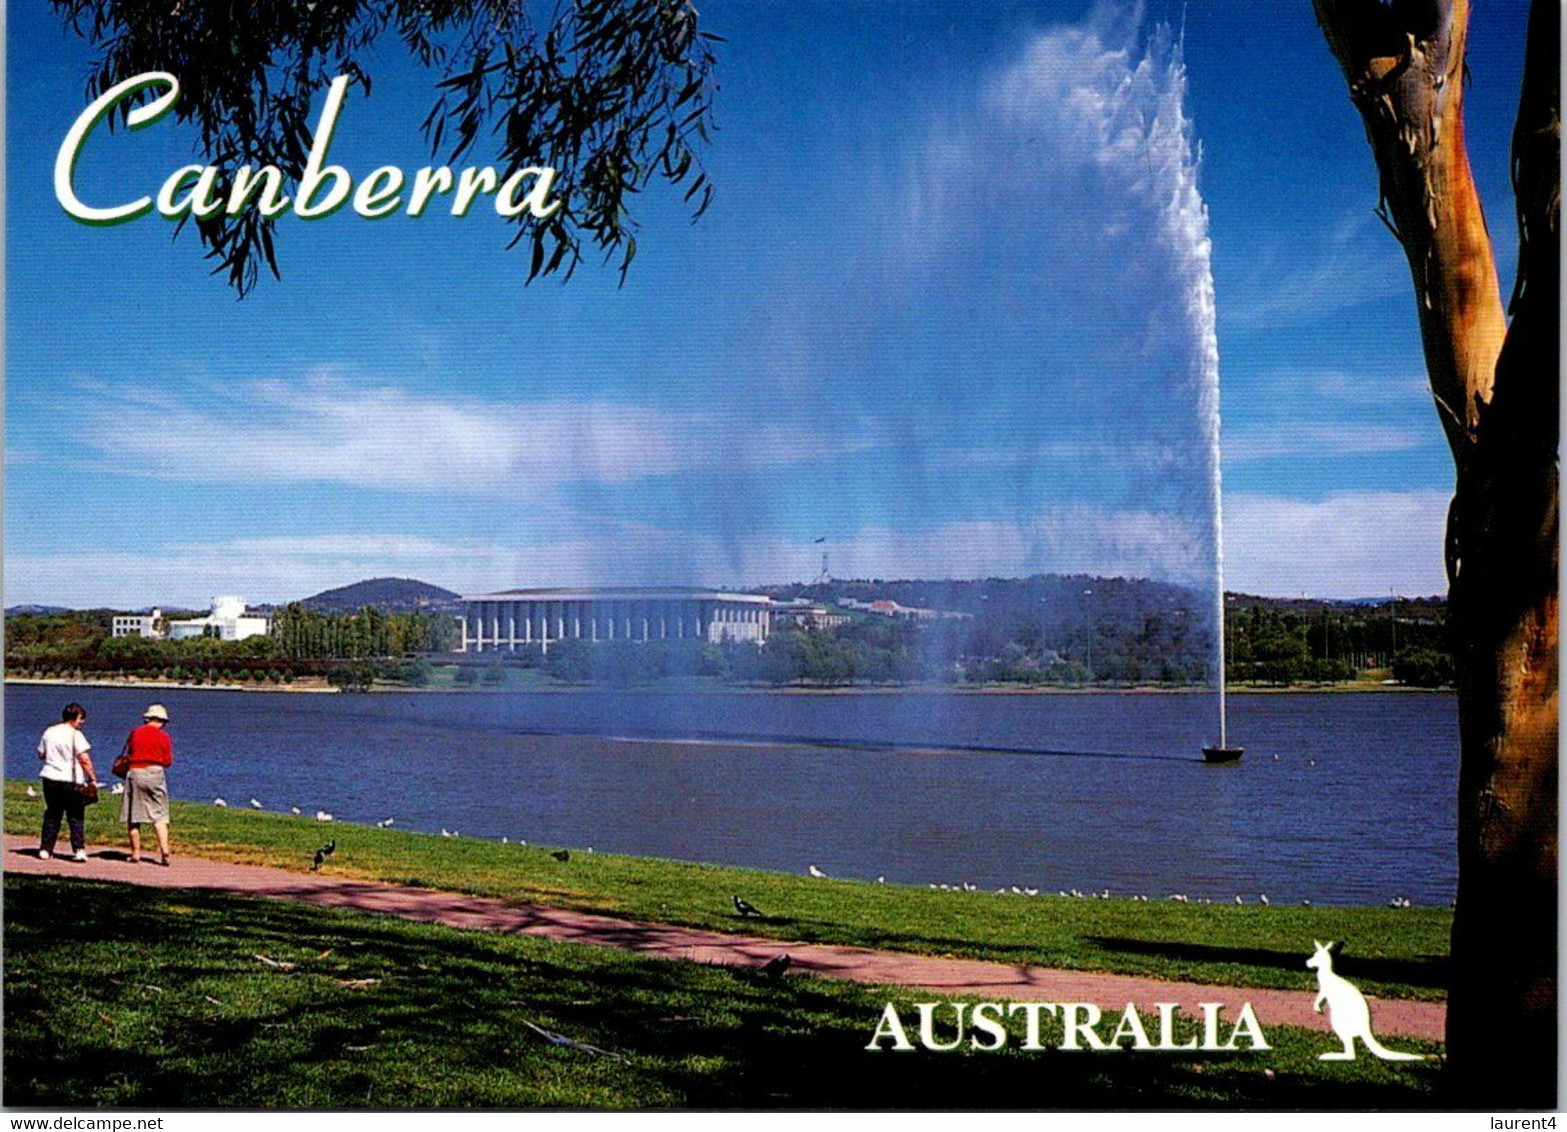 (4 M 50) Australia  - ACT - City Of Canberra (Captain Cook Water Jet & National Library) - Canberra (ACT)